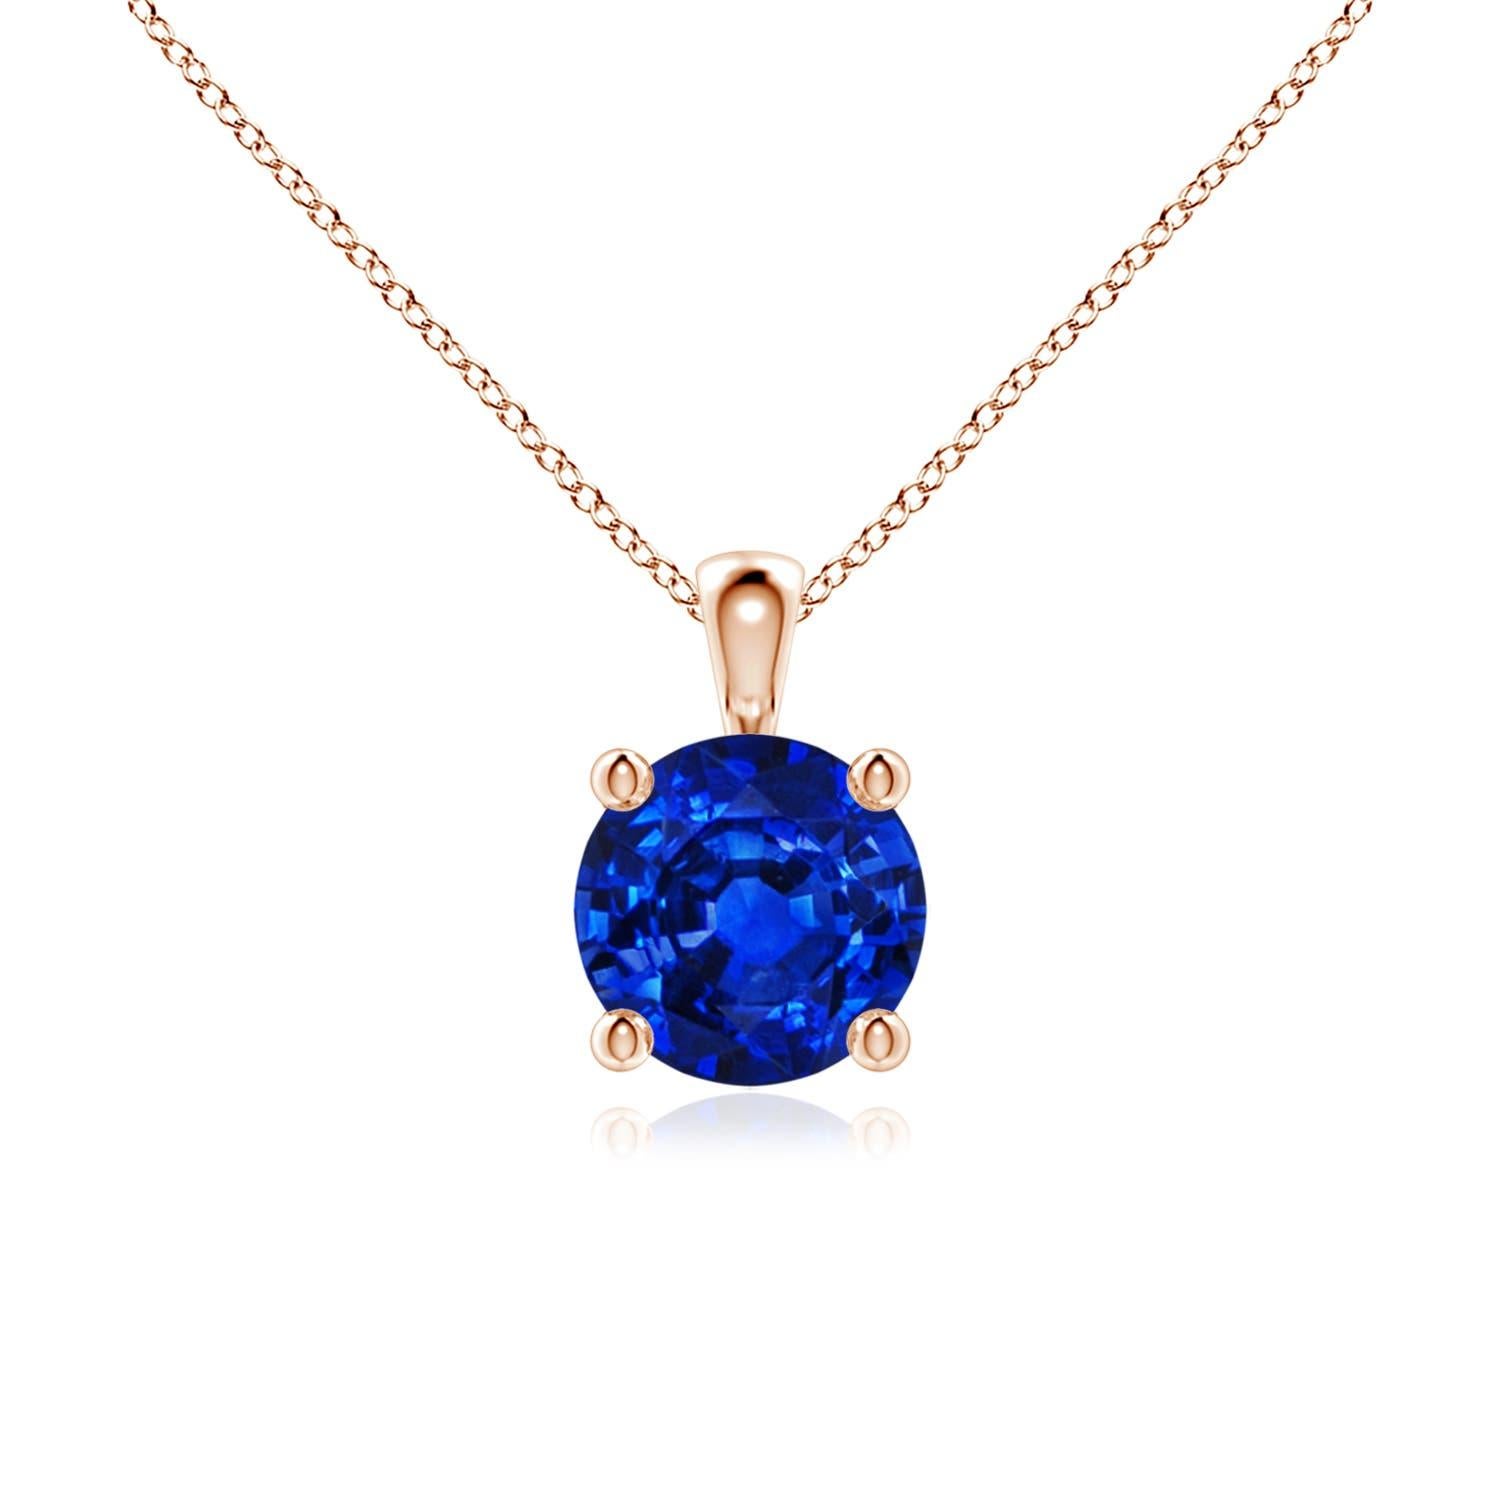 Natural Round Blue Sapphire Solitaire Pendant in 14K Rose Gold Size-6mm